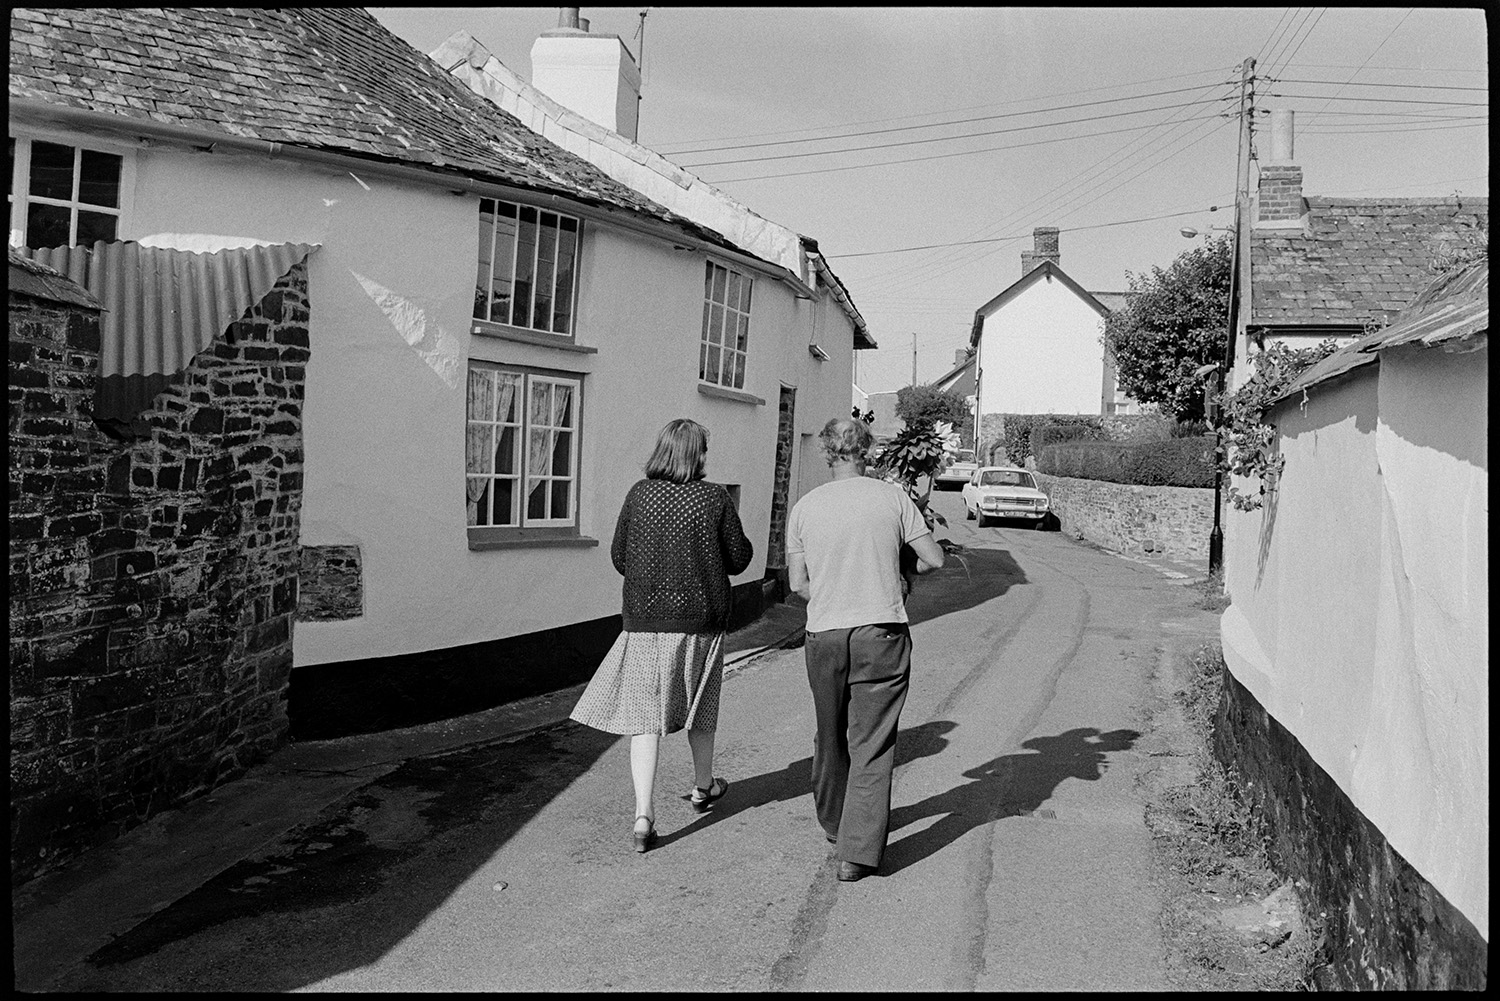 Preparing vegetables and flowers, flower show, boot of car with vegetables, chrysanthemums. 
[Rose Mitchell and Michael Mitchell, carrying a vase of Dahlias, along Aller Road in Dolton on their way to Dolton Flower Show. They are passing cottages.]